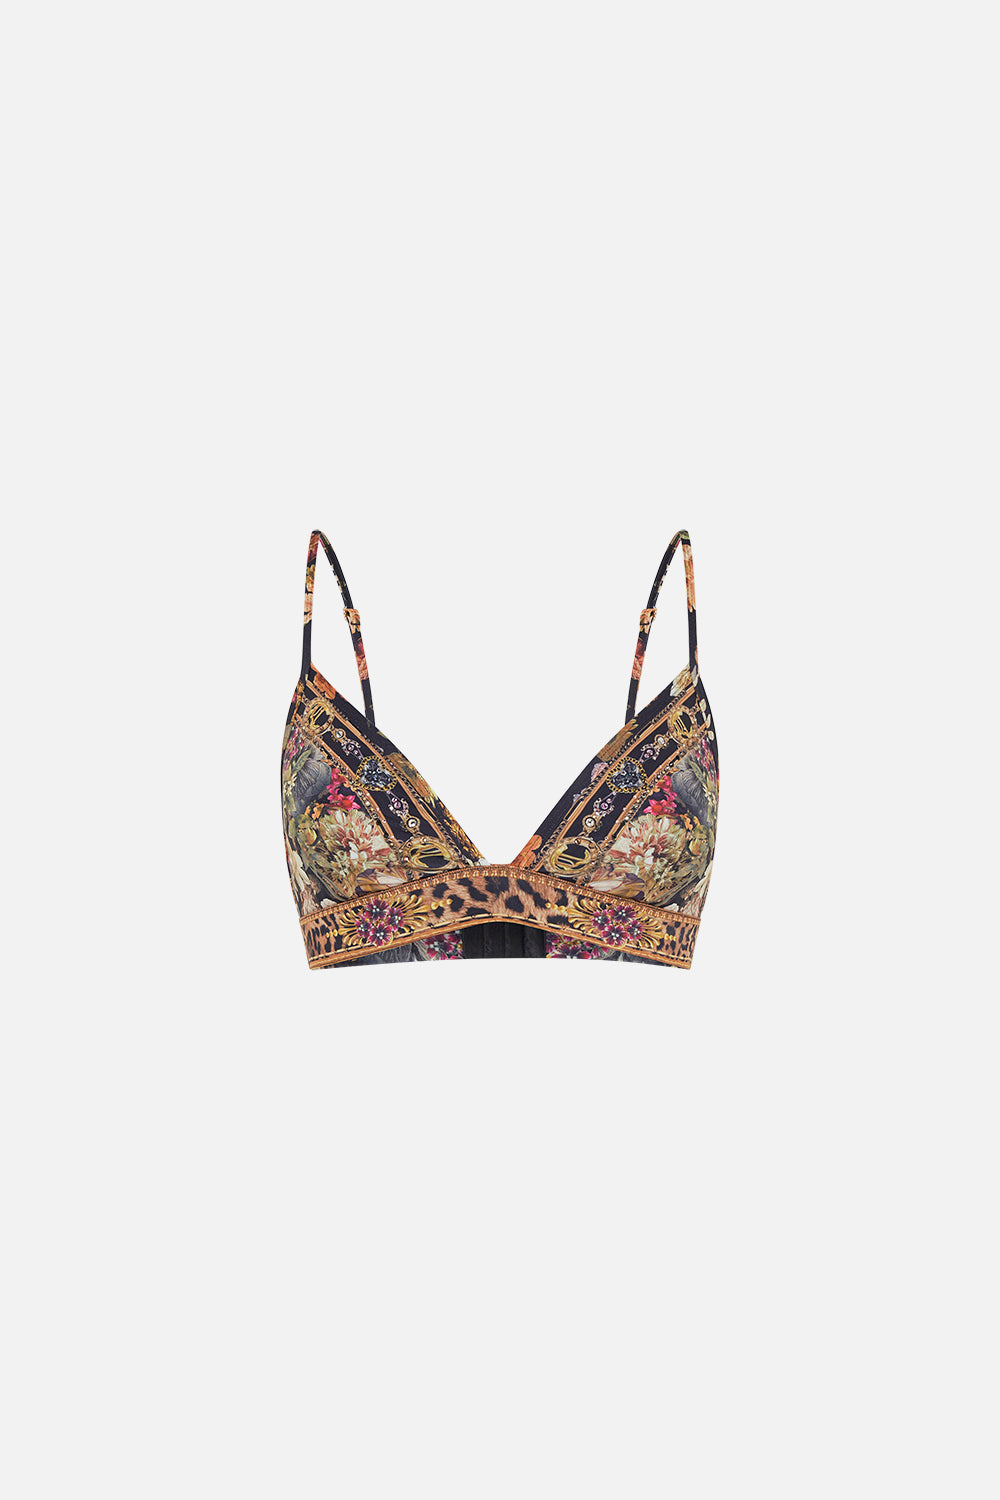 Product view of CAMILLA bra in A Night At The Opera print